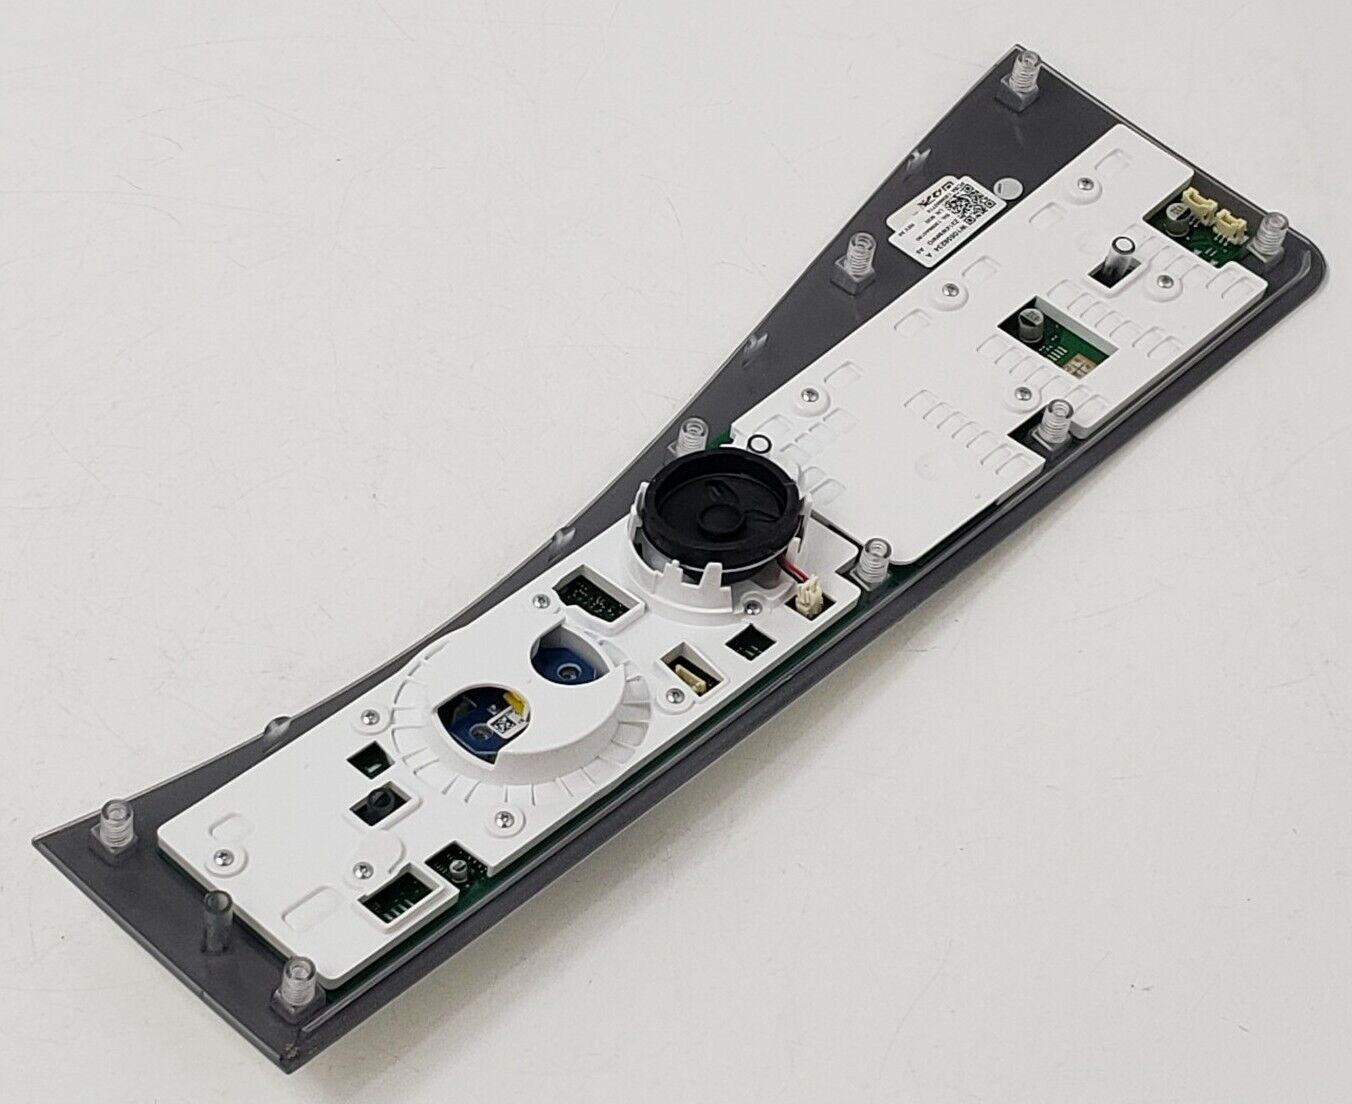 OEM Replacement for Whirlpool Washer Control Panel W10558234